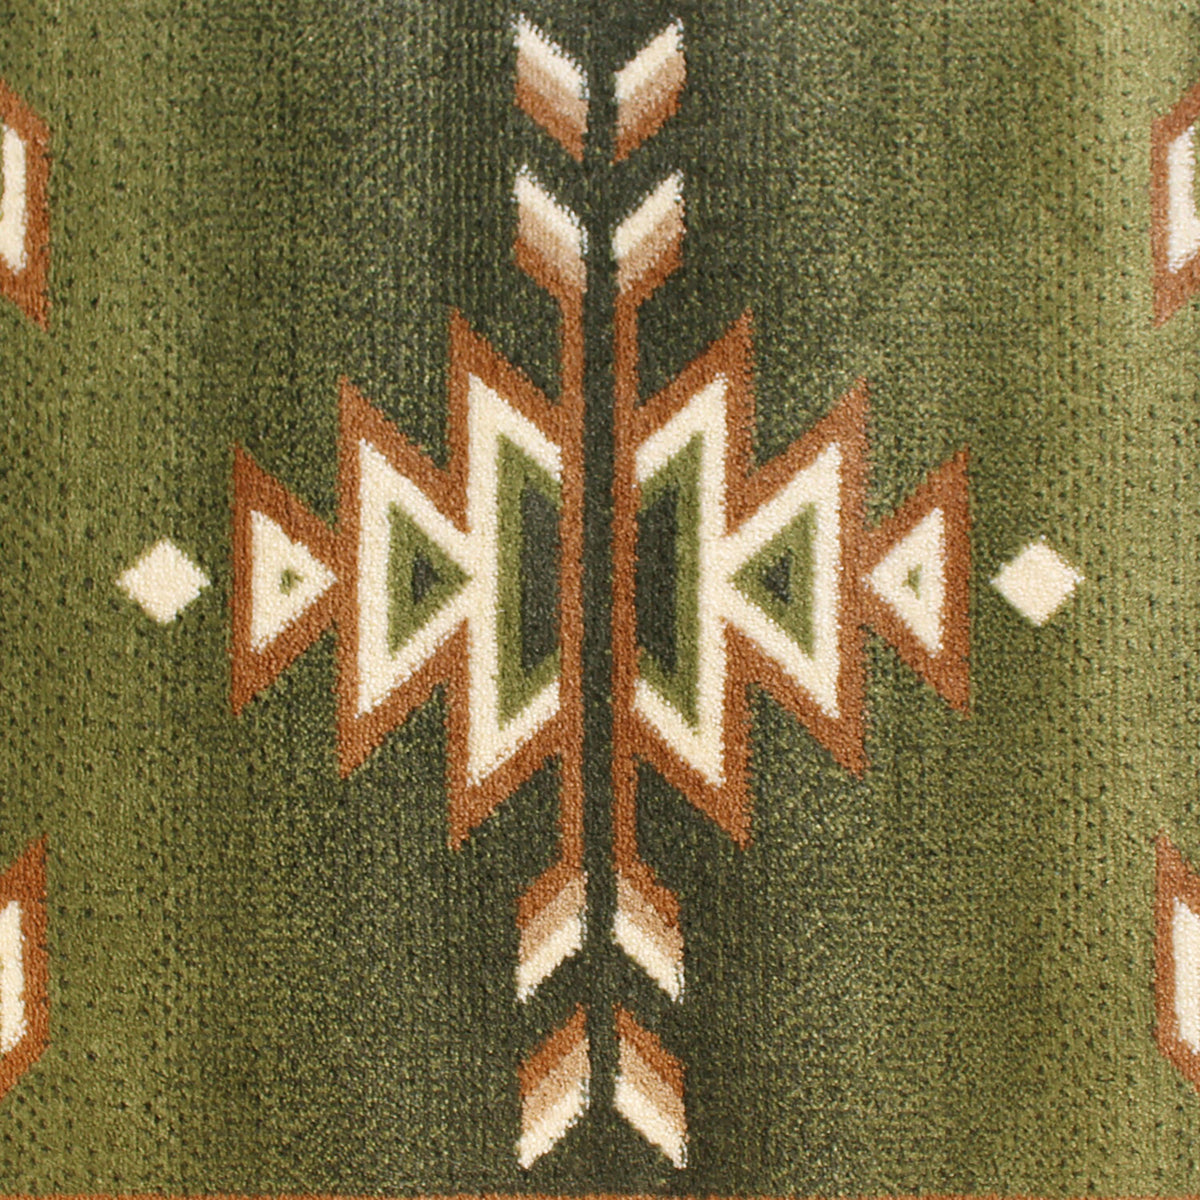 Green,3' x 16' |#| Multipurpose Southwestern Style Patterned Indoor Area Rug - Green - 3' x 16'